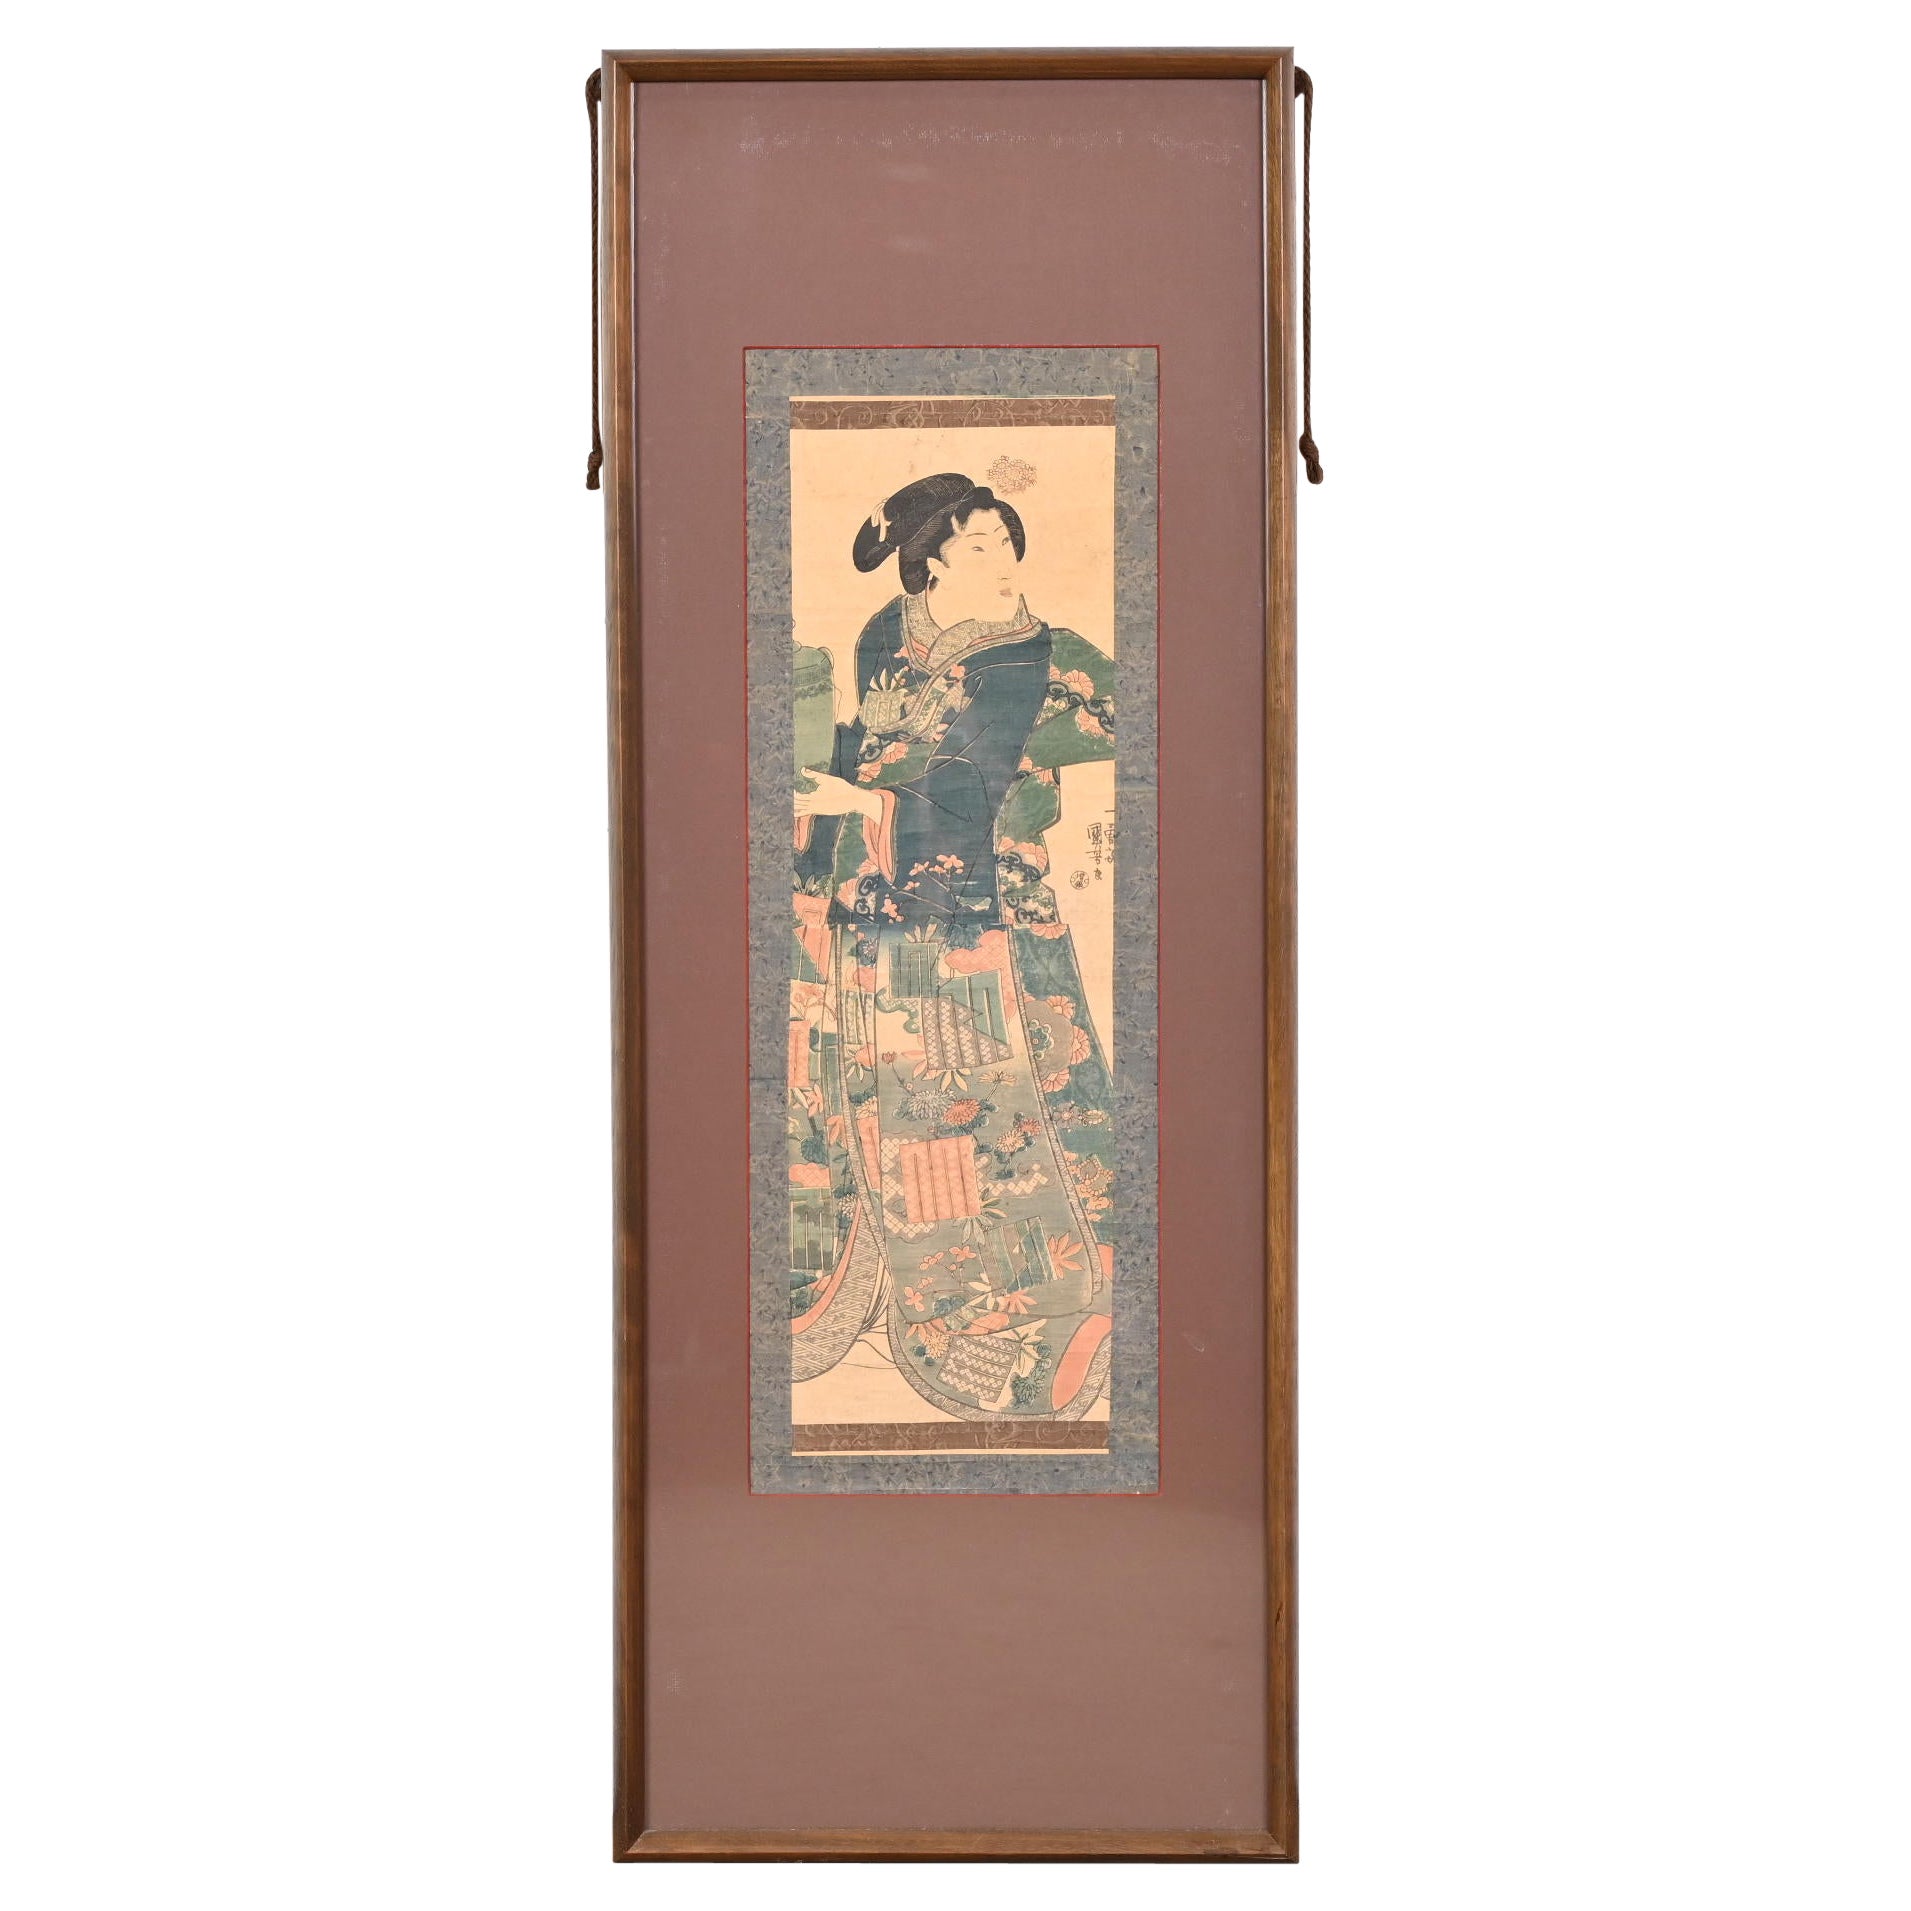 Japanese Scroll Painting of Woman From Frank Lloyd Wright's DeRhode's House